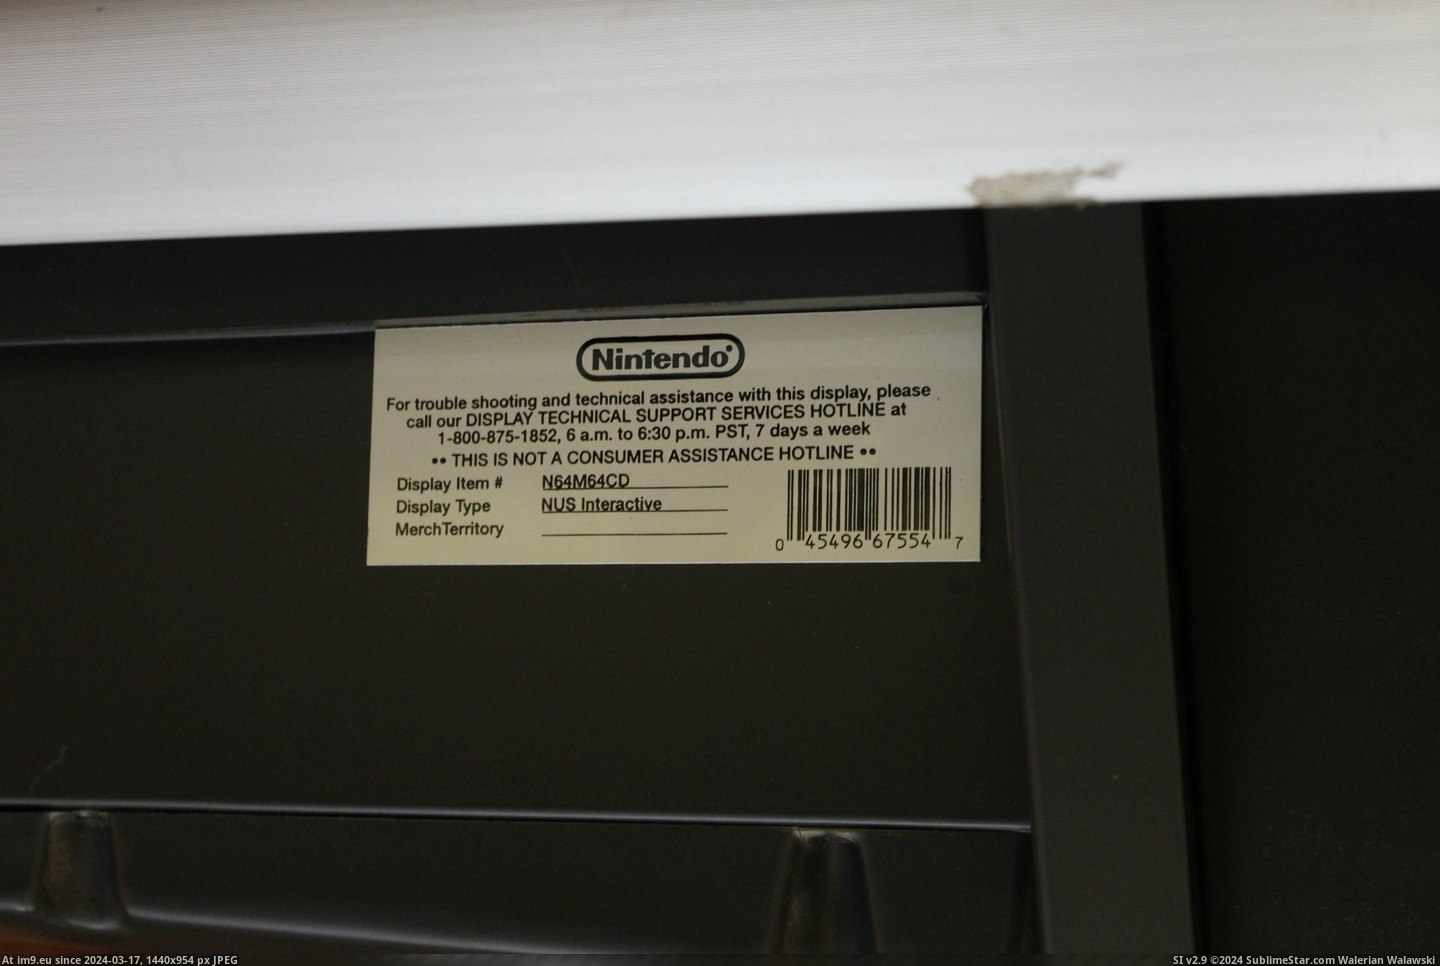 #Gaming #Year #Ago #Off #Demo #Craigslist #Unit #Rarest #Bought #Store #Own #N64 [Gaming] Bought a N64 Store Demo Unit off Craigslist 1 year ago. Probably the rarest thing I own. 10 Pic. (Bild von album My r/GAMING favs))